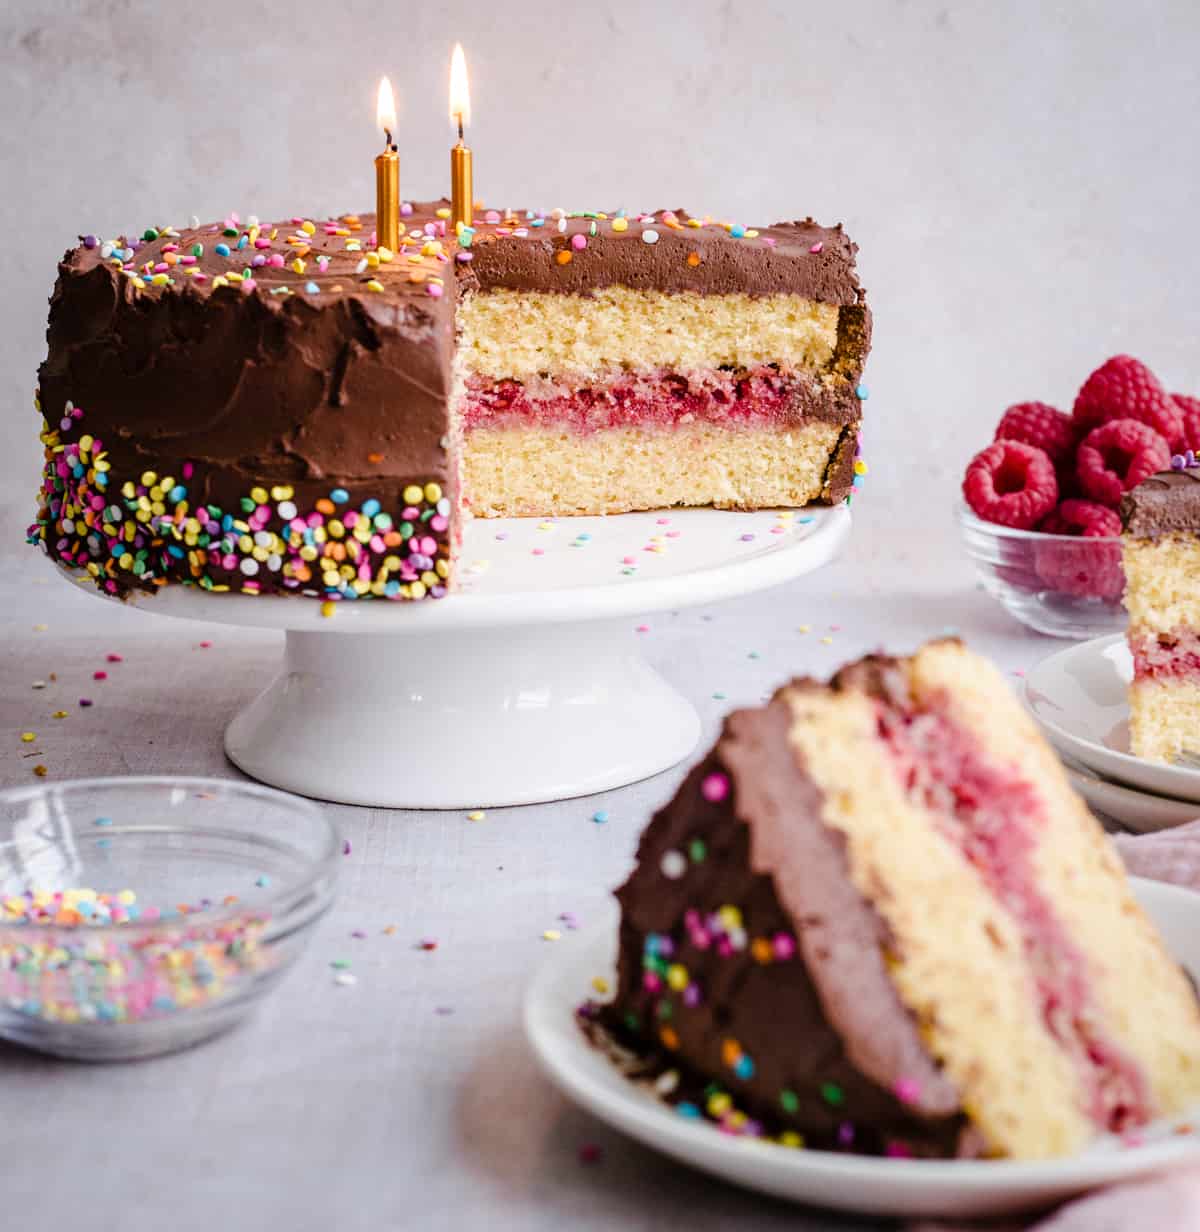 Birthday cake on a stand with slice of cake in front and bowls of raspberries and sprinkles around